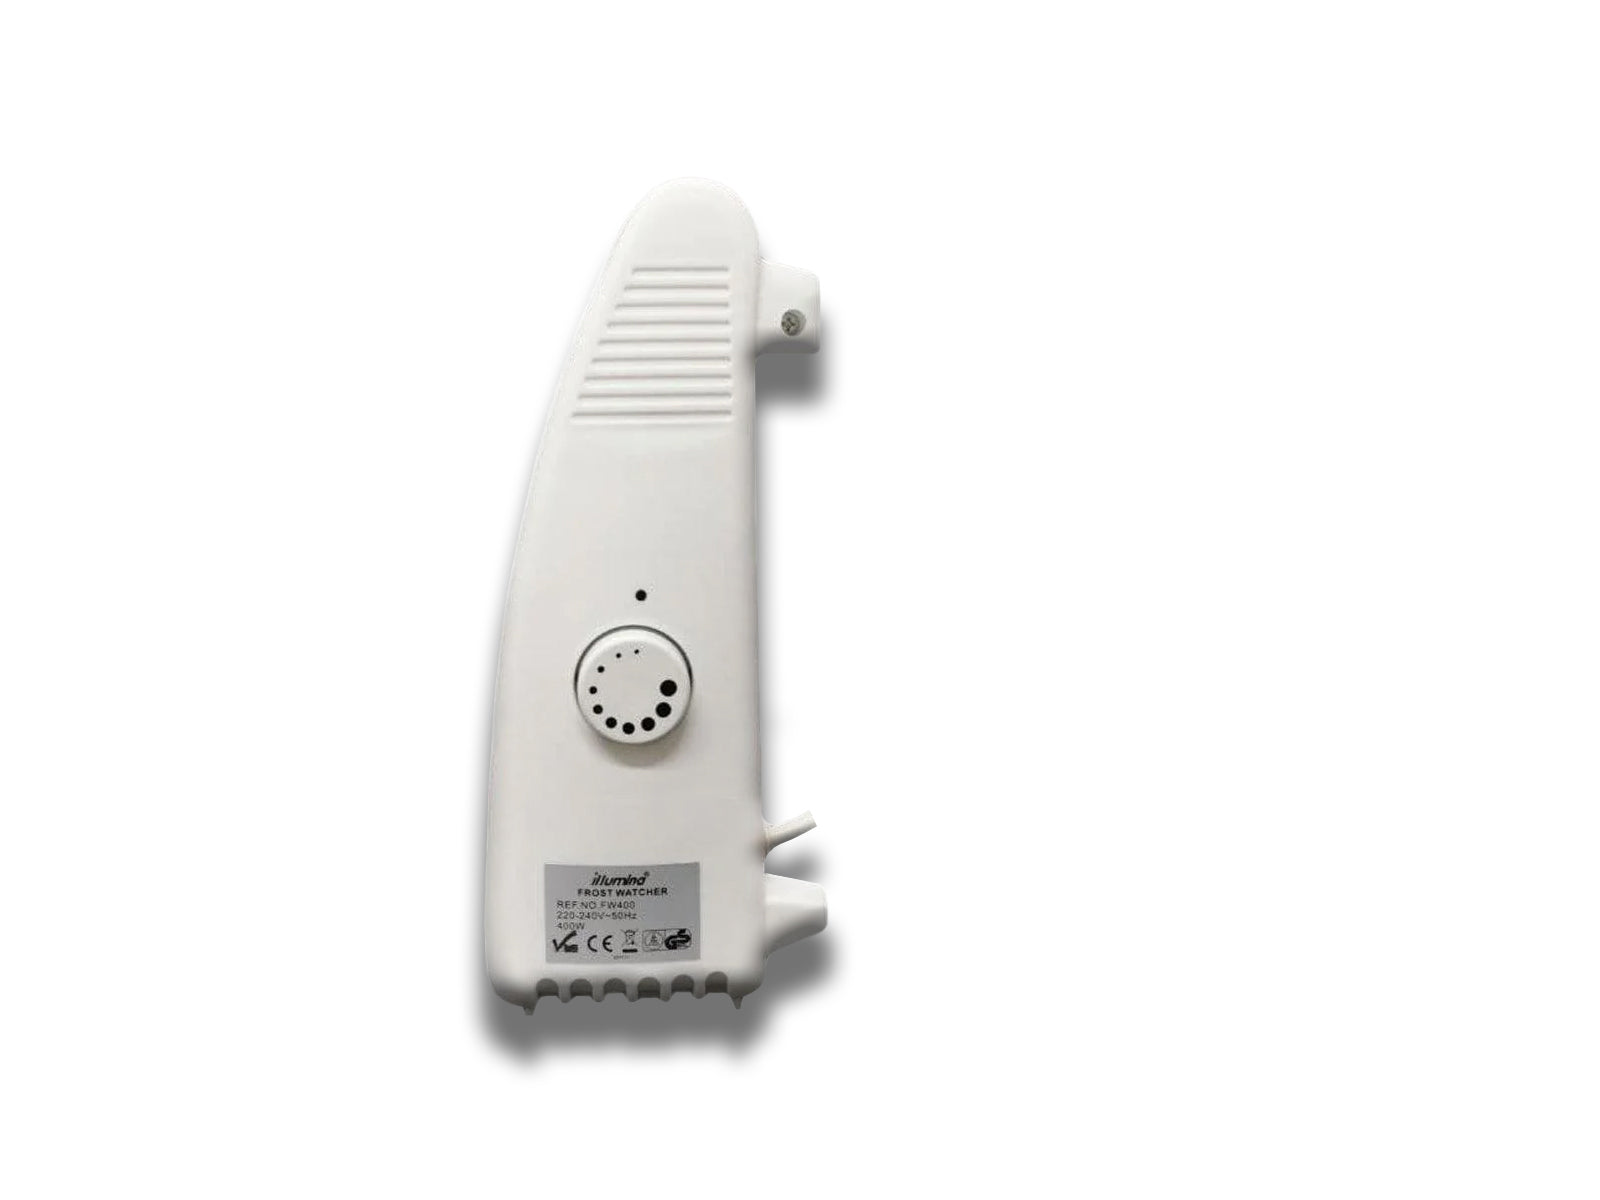 Right-side-view-image-of-the-heater-on-the-white-background